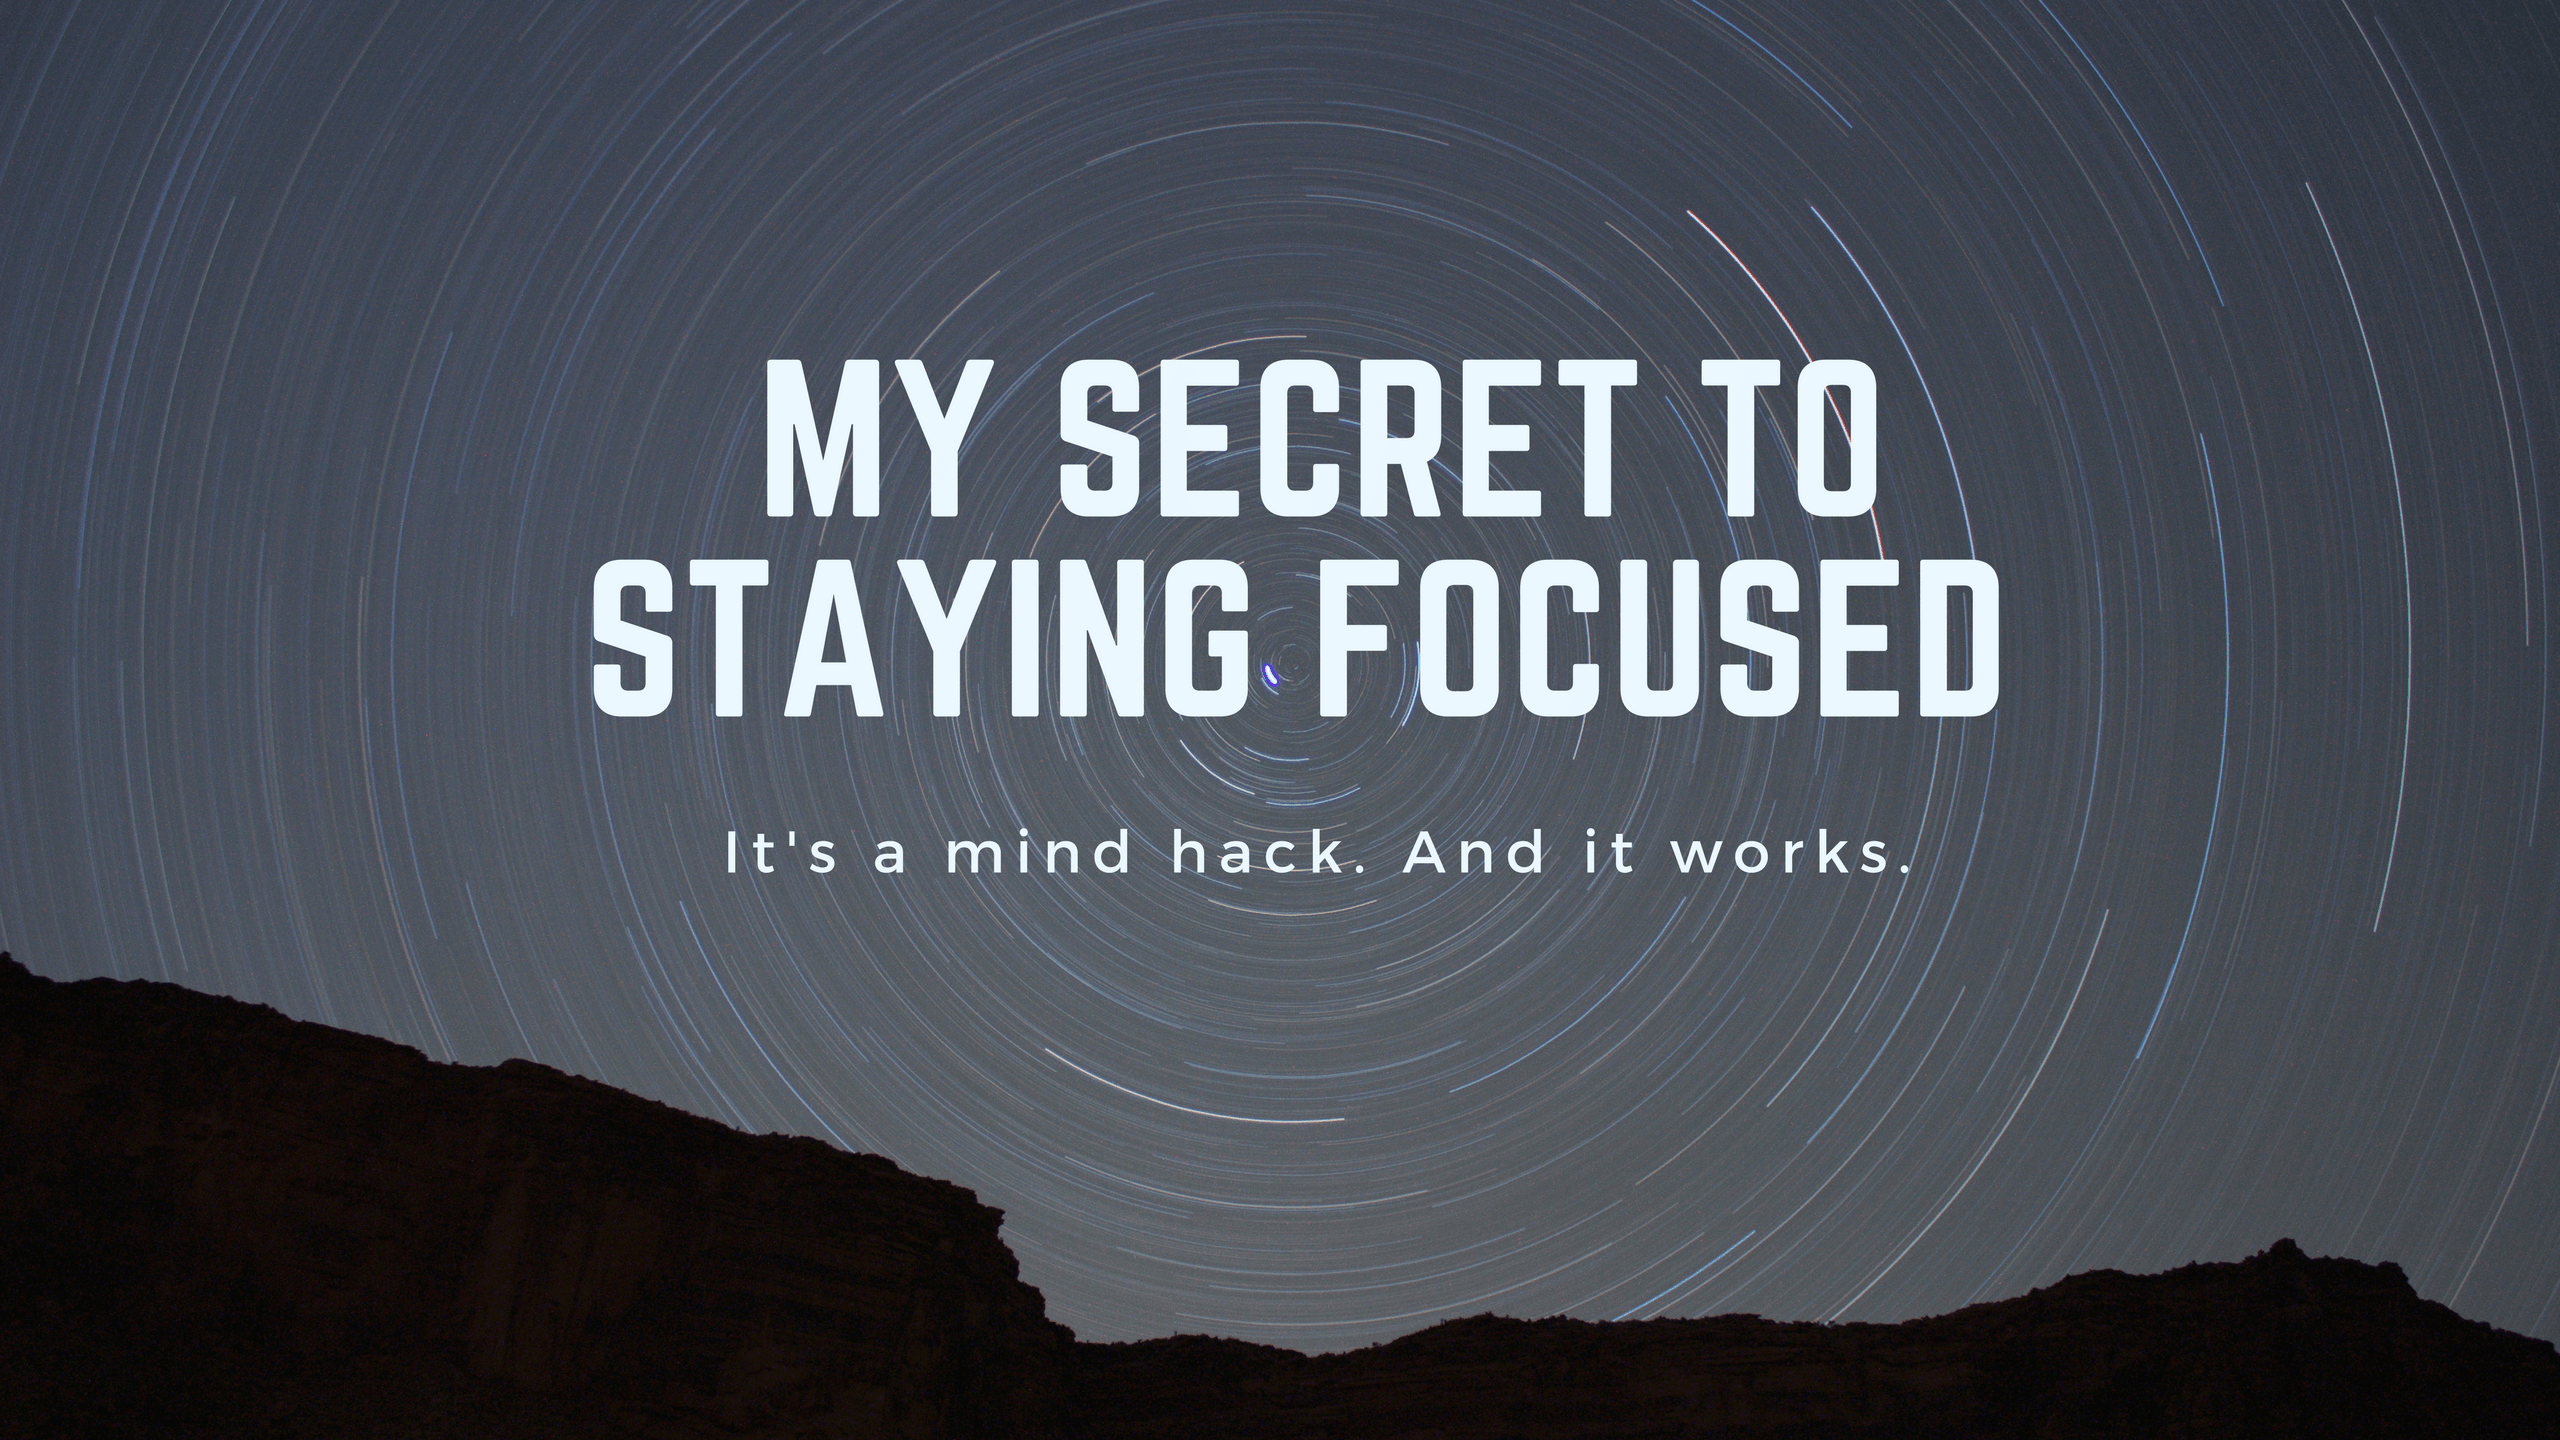 My secret to stay focused